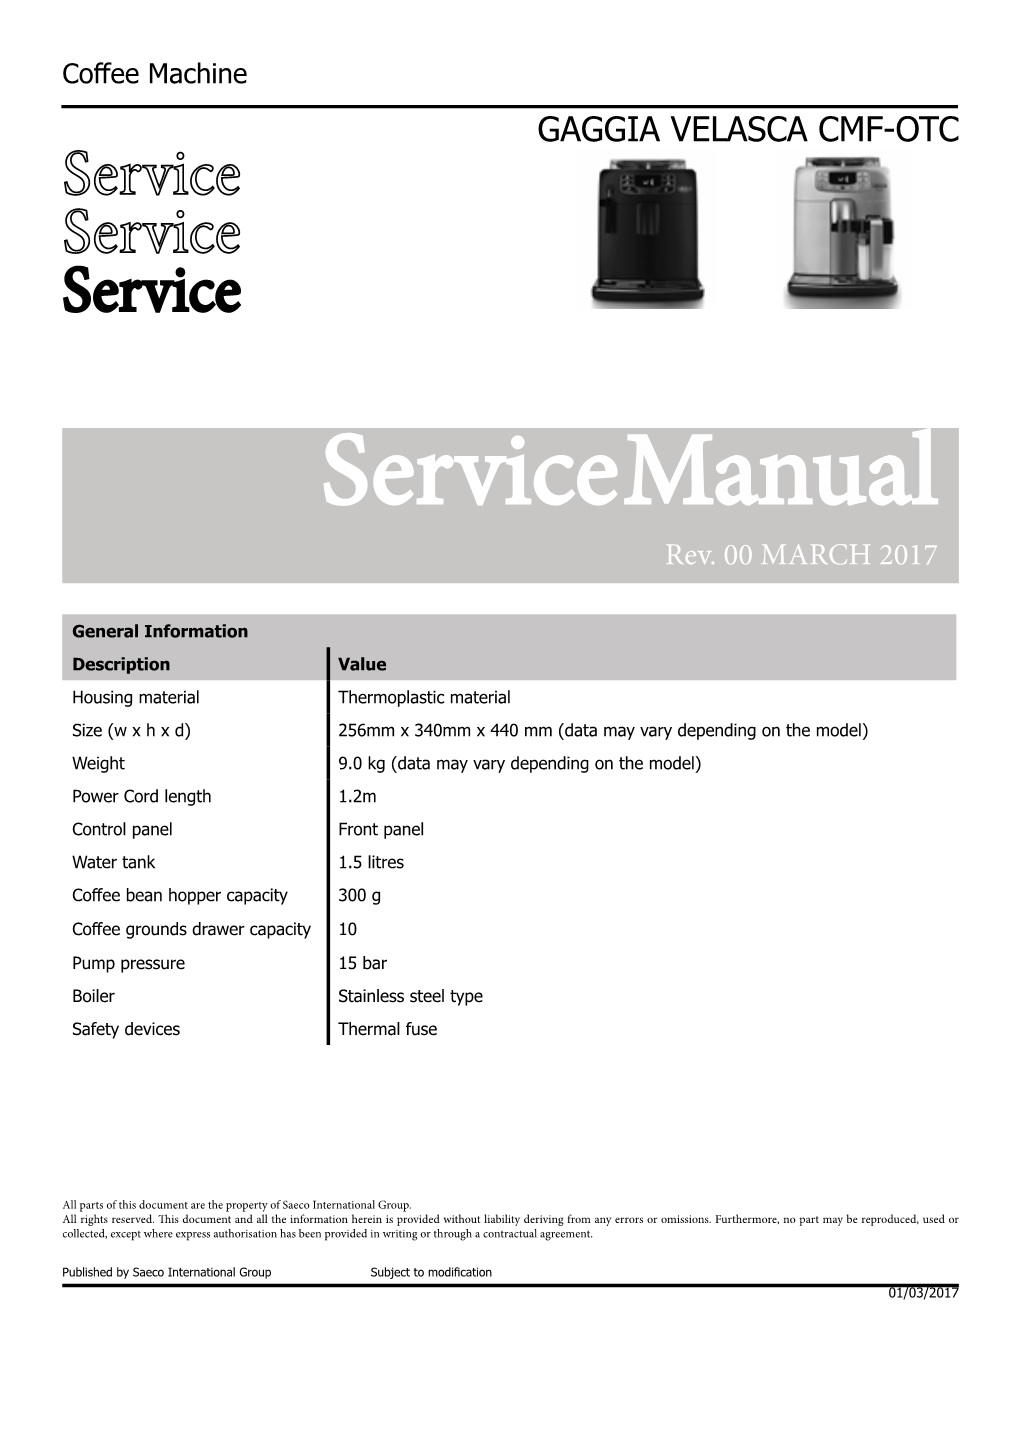 SERVICE MANUAL from Rev